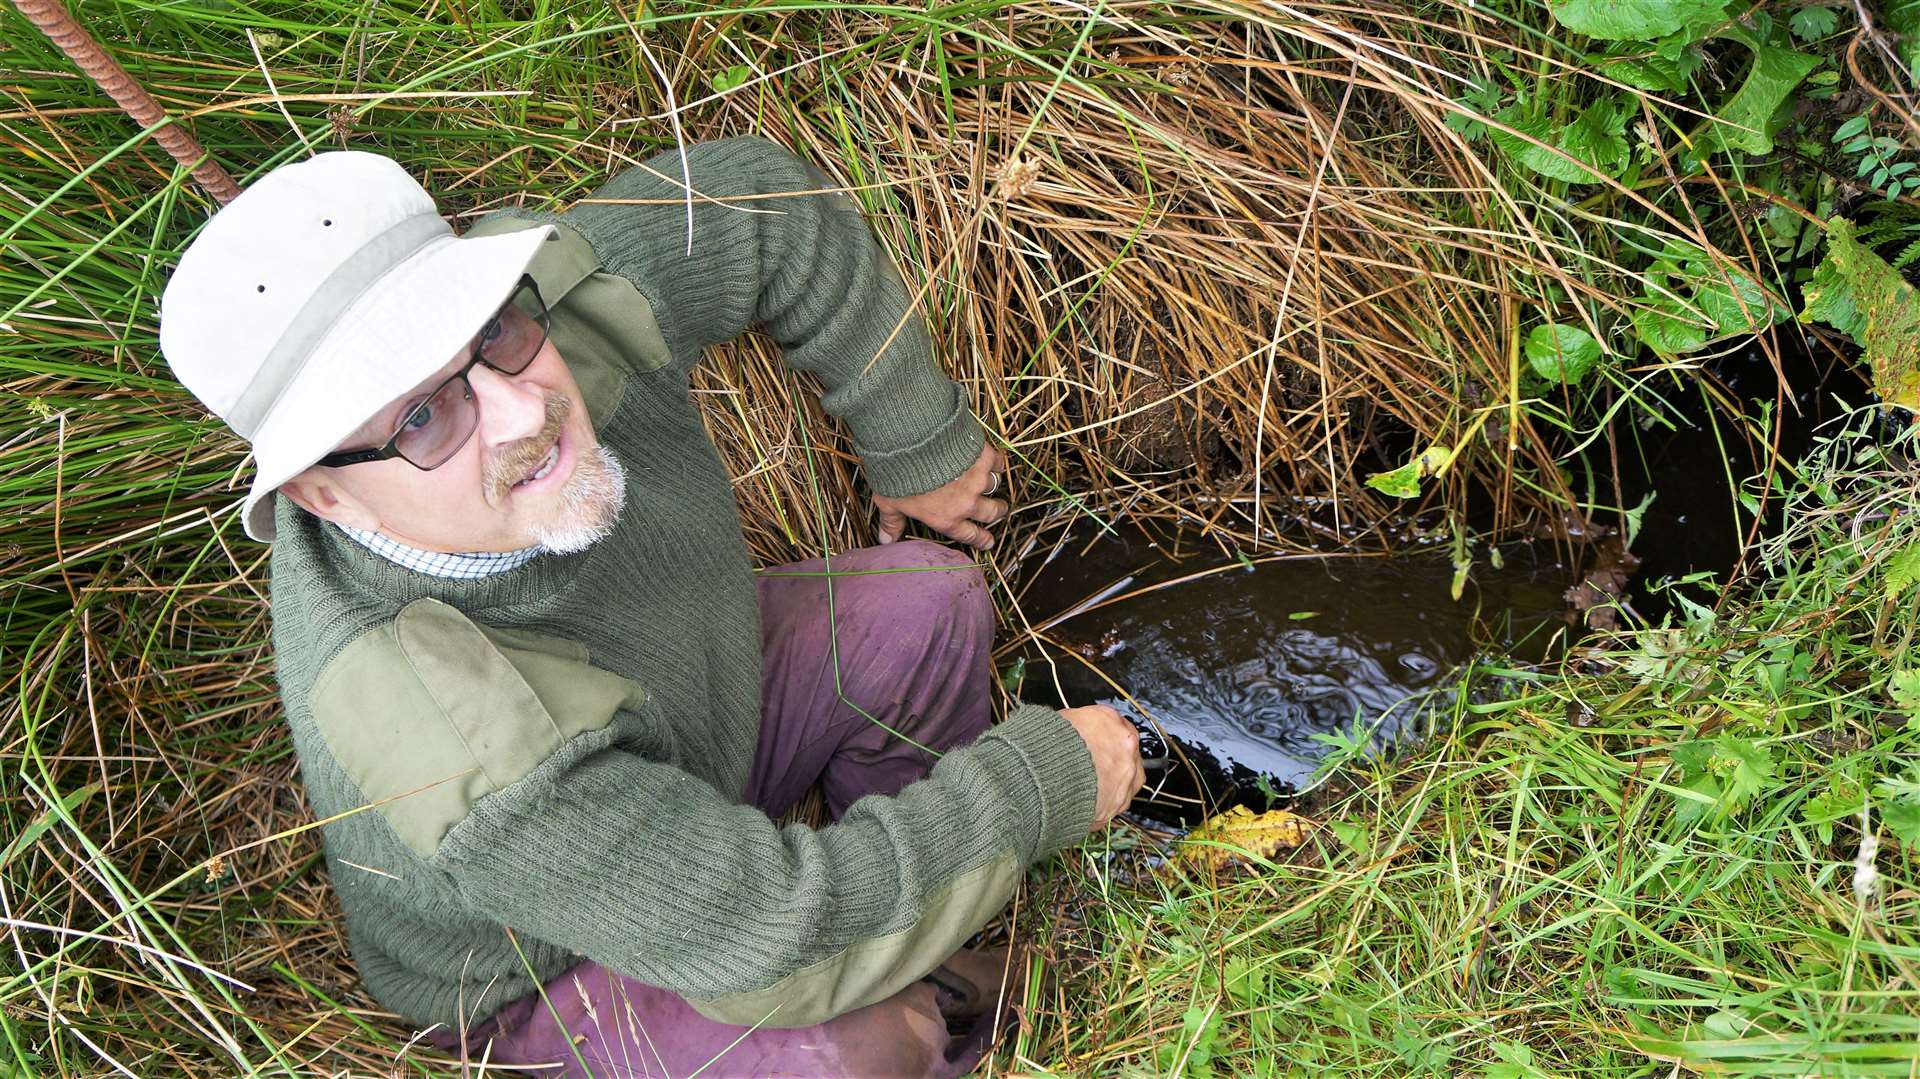 In 2017 Peter Darmady contacted the paper about the issue of broken water pipes that affected the supply to his home at Roster. He said, however, that he was one of the 'lucky ones' that had a natural fresh water supply running past the house. Picture: DGS